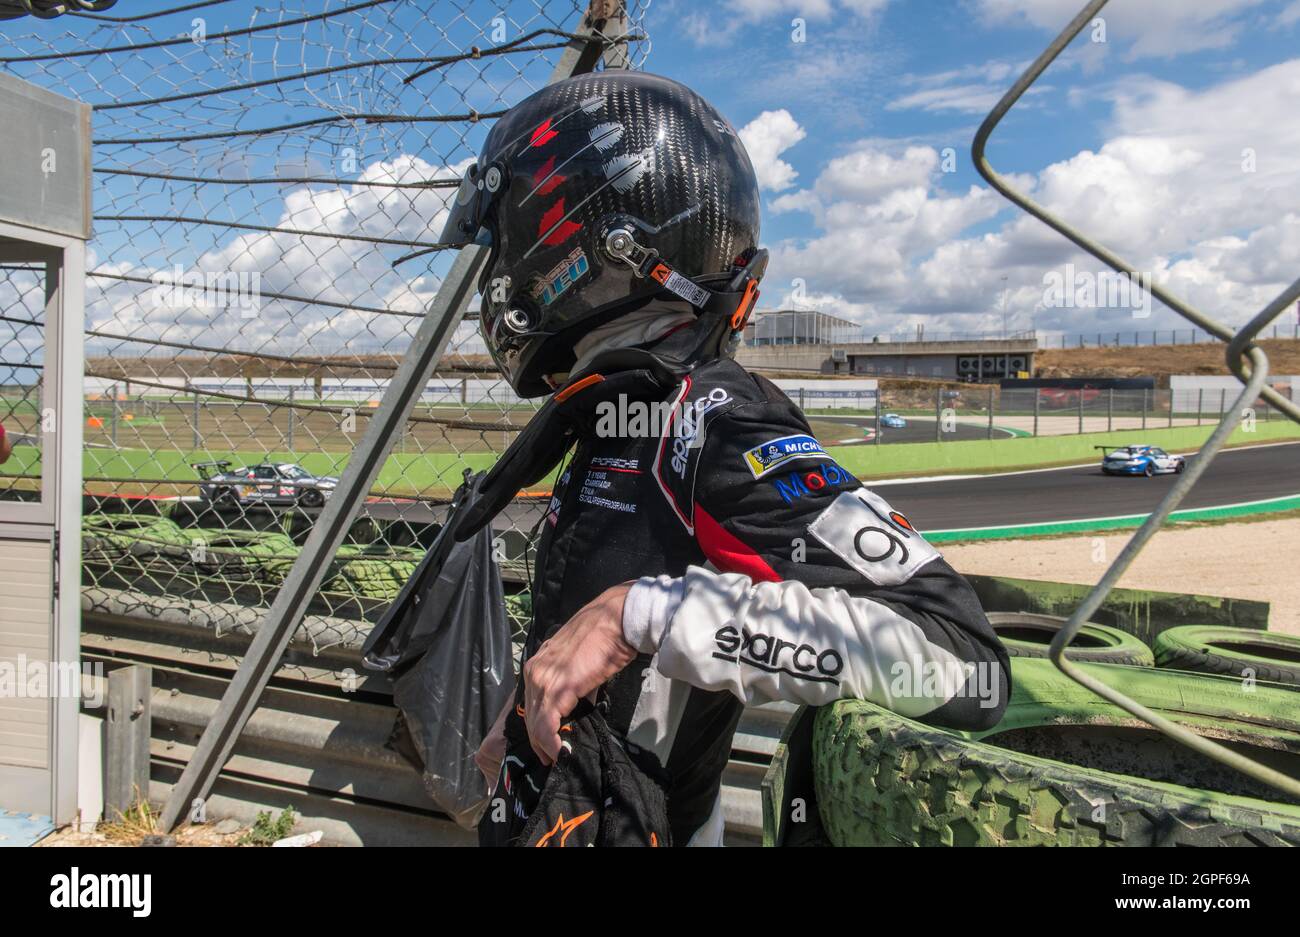 Vallelunga, italy september 19th 2021 Aci racing weekend. Car driver in helmet and racing suit out of race looking at cars on track behind safety barr Stock Photo